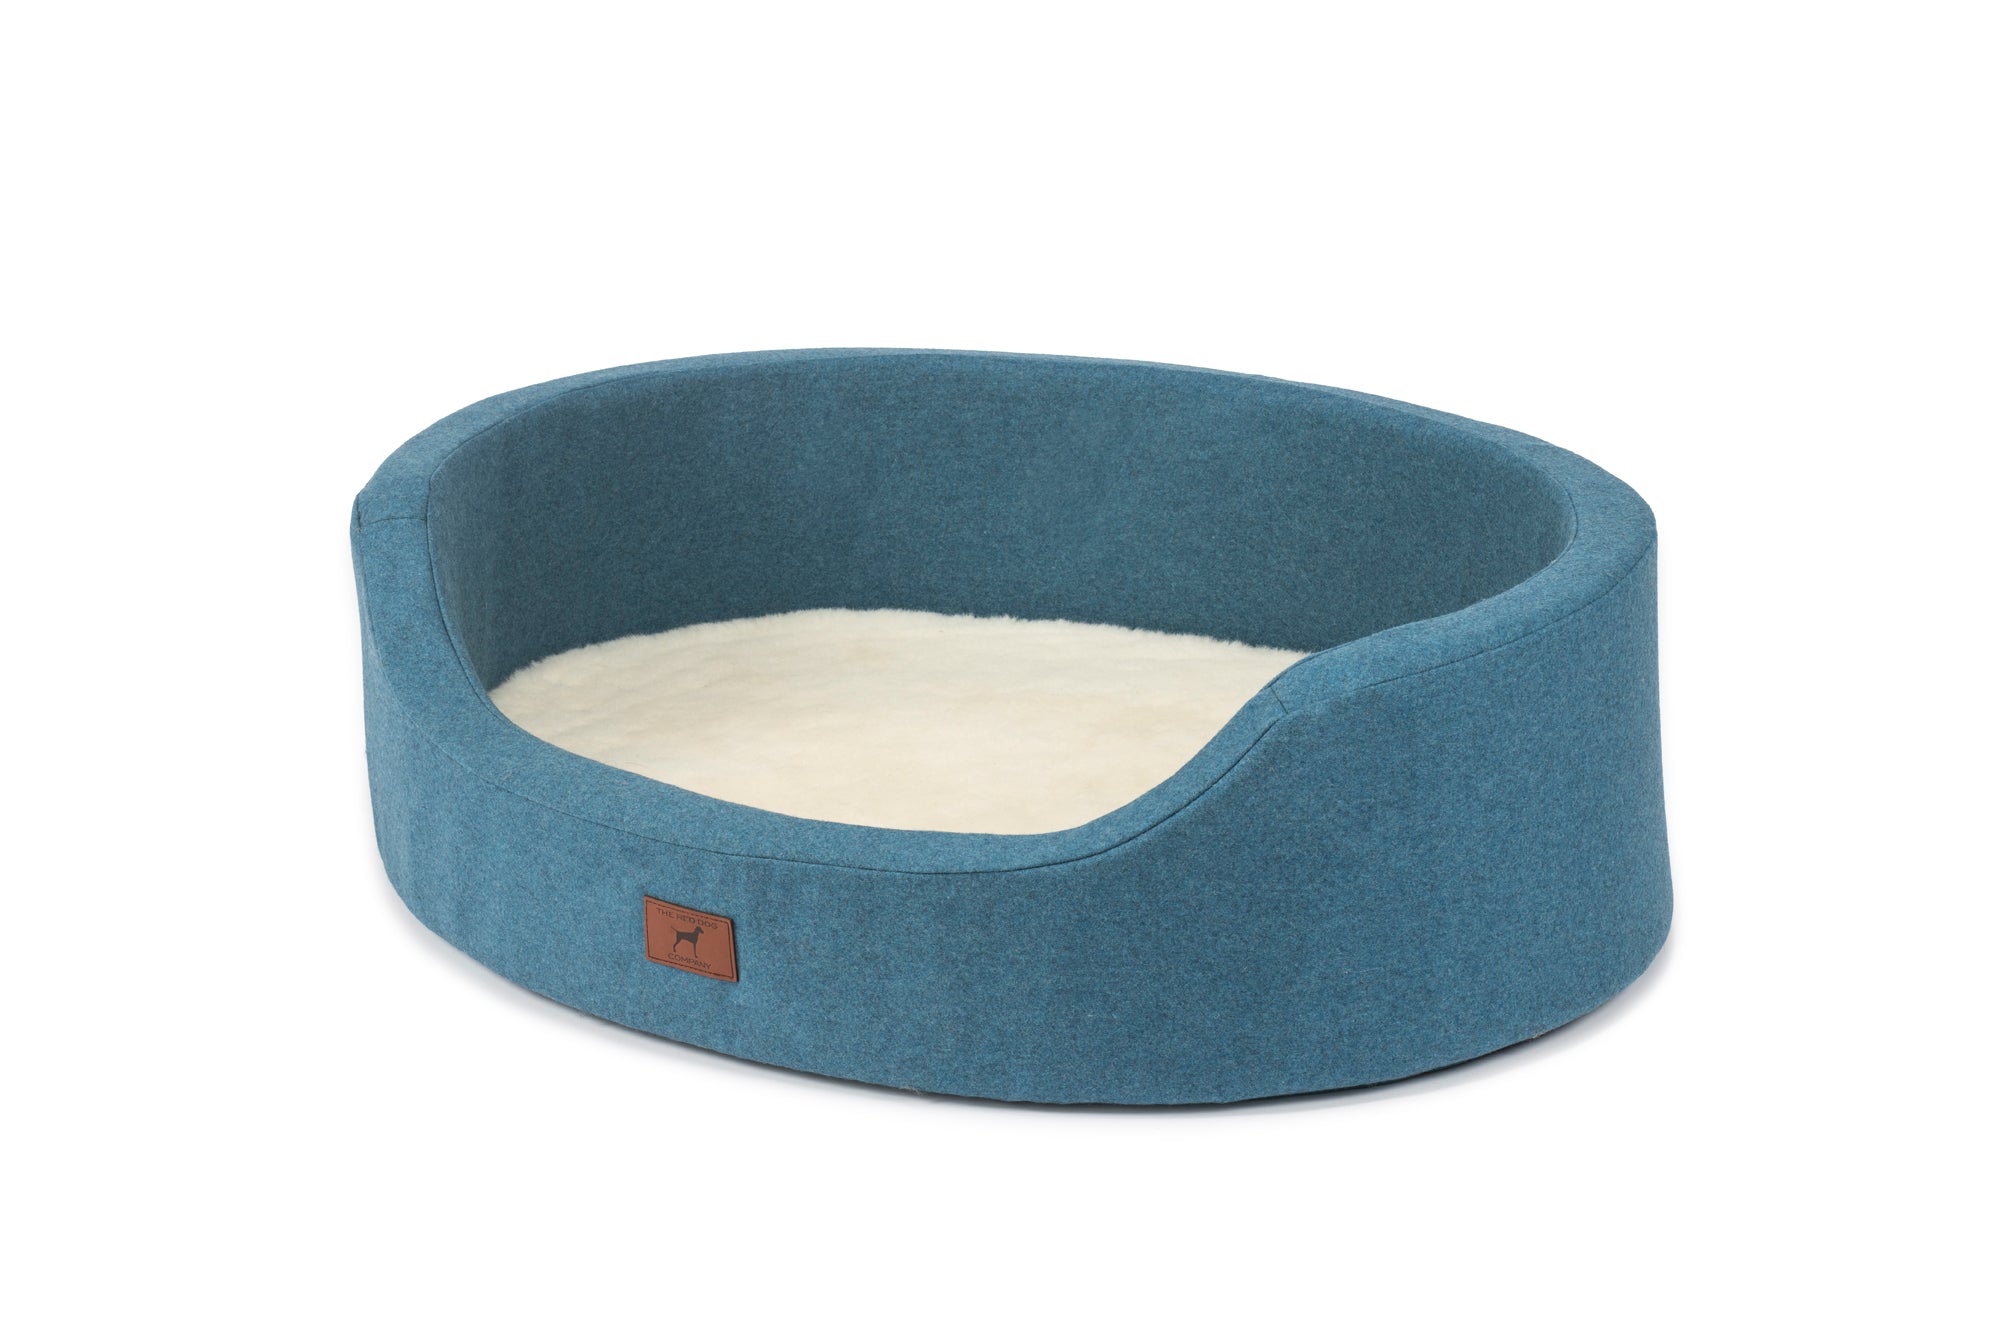 Cerulean Blue Oval Dog Bed Outer Bed Cover